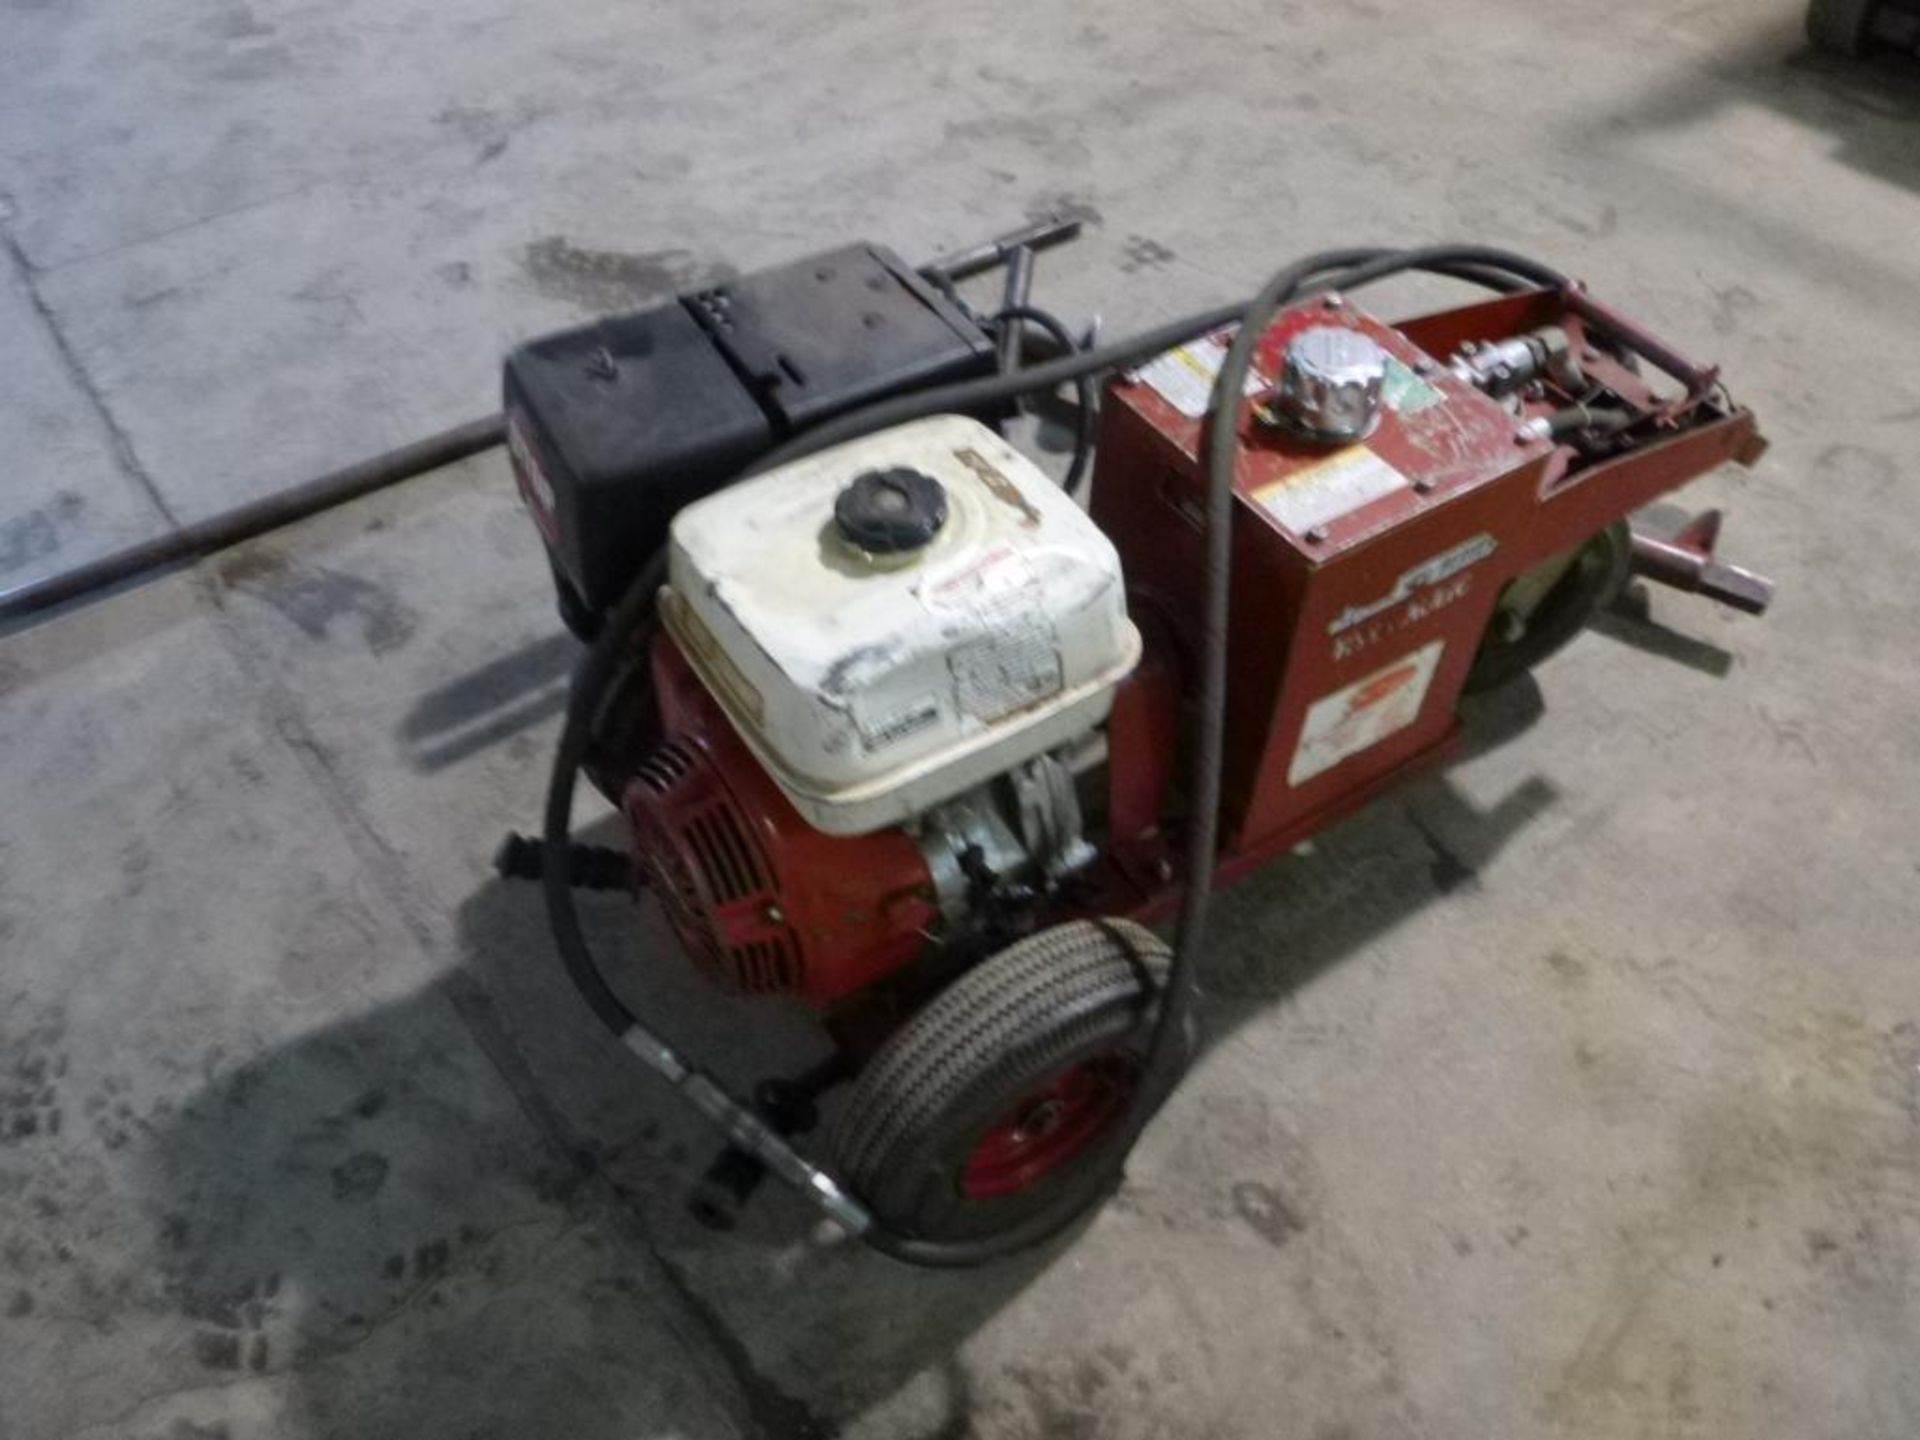 LOT: Little Beaver H4813 Hydraulic 1 Man Auger, Snap-On 8 in. x 42 in. Auger - Image 2 of 3